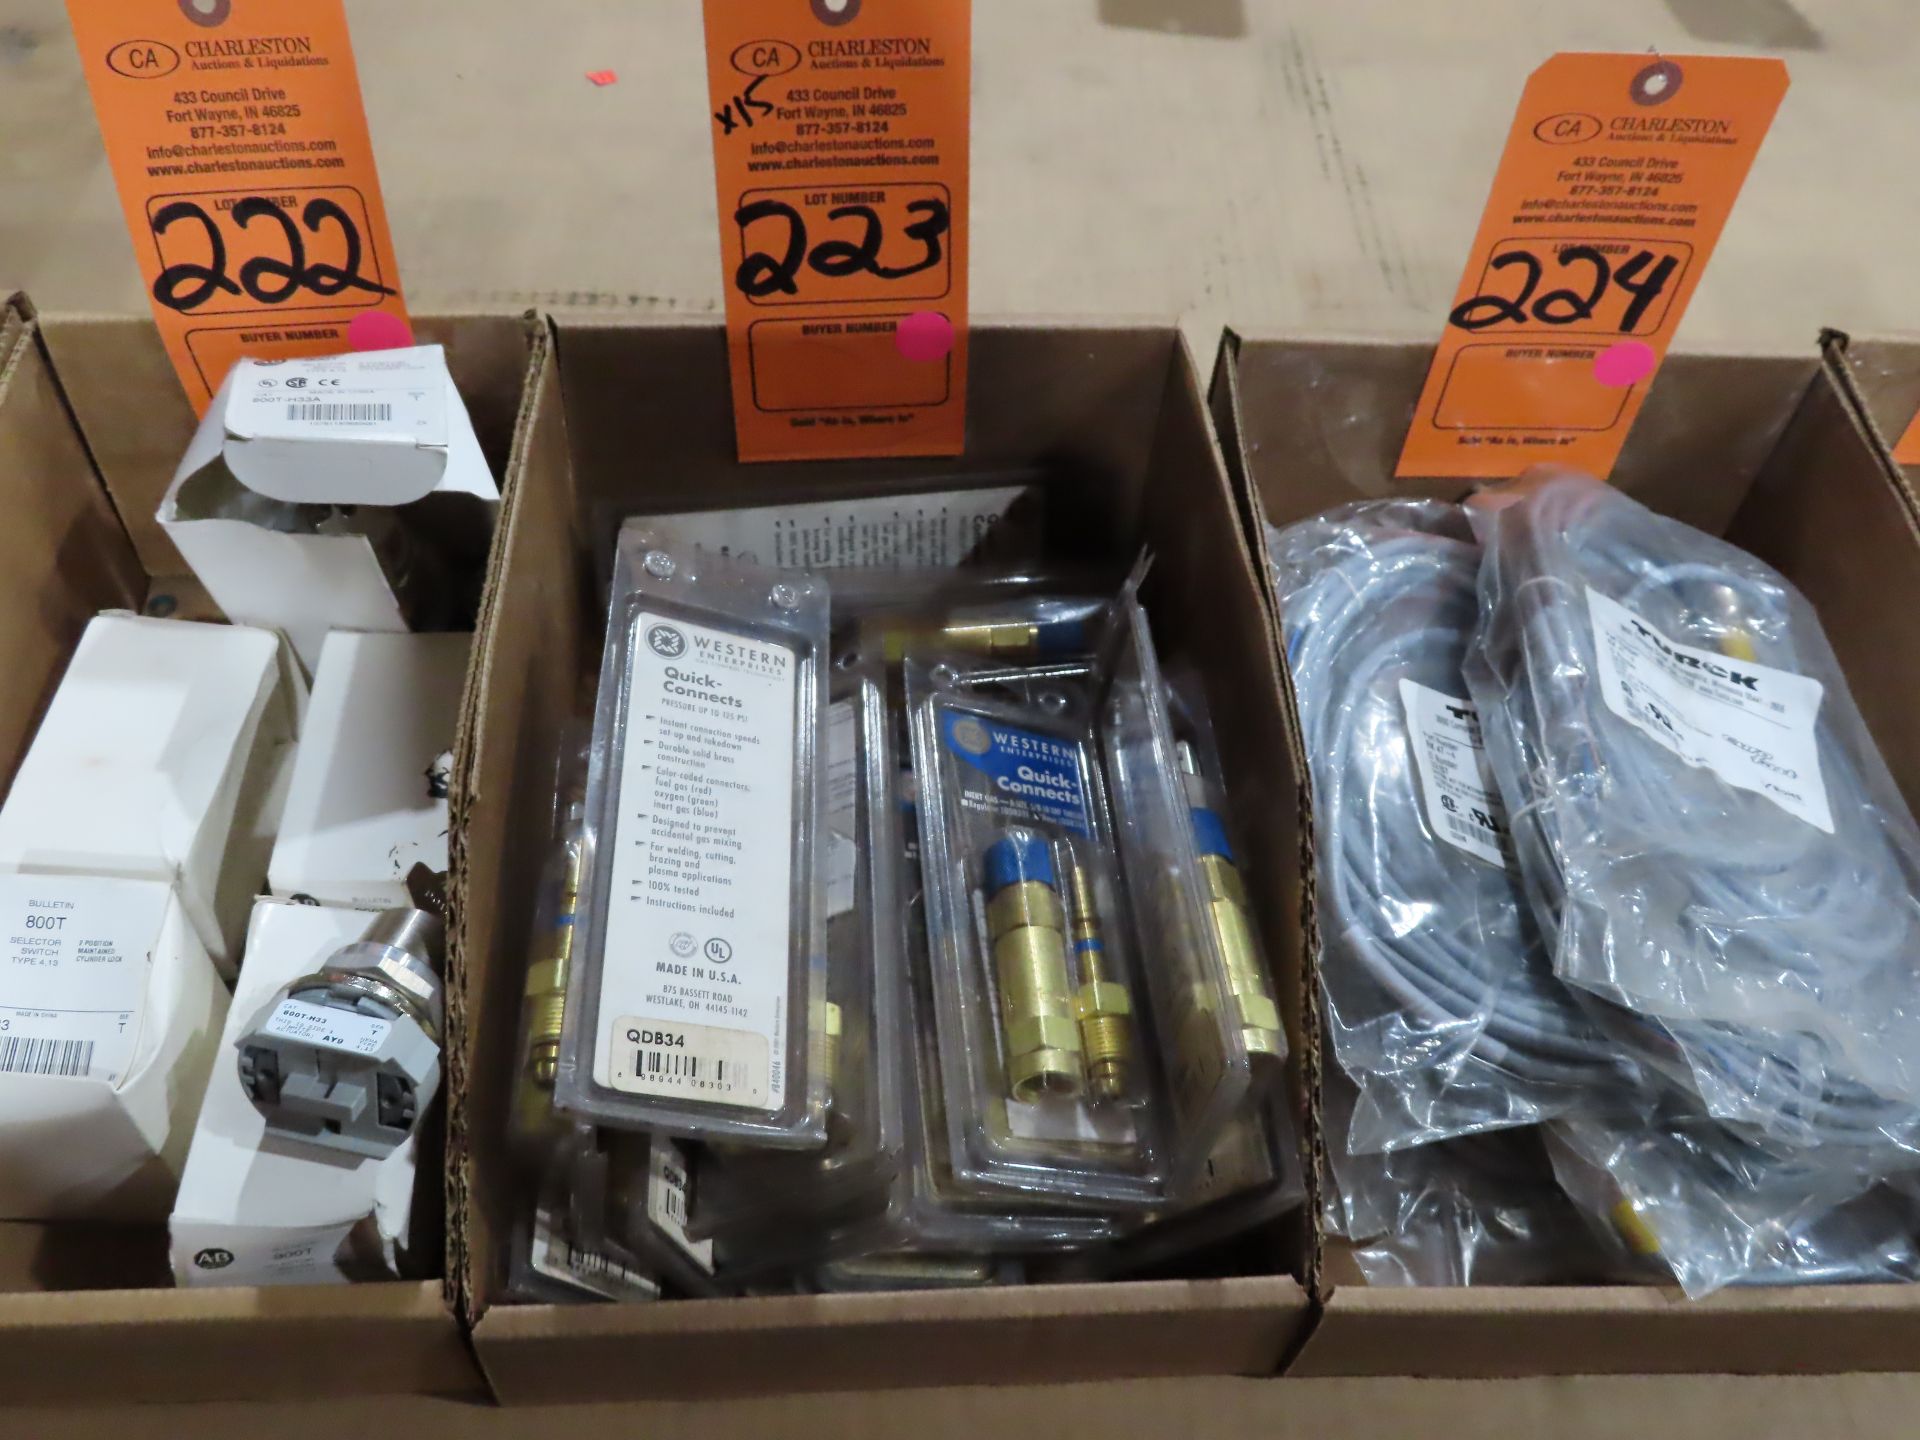 Qty 15 Western Enterprises model QDB34, new in packages, as always with Brolyn LLC auctions, all